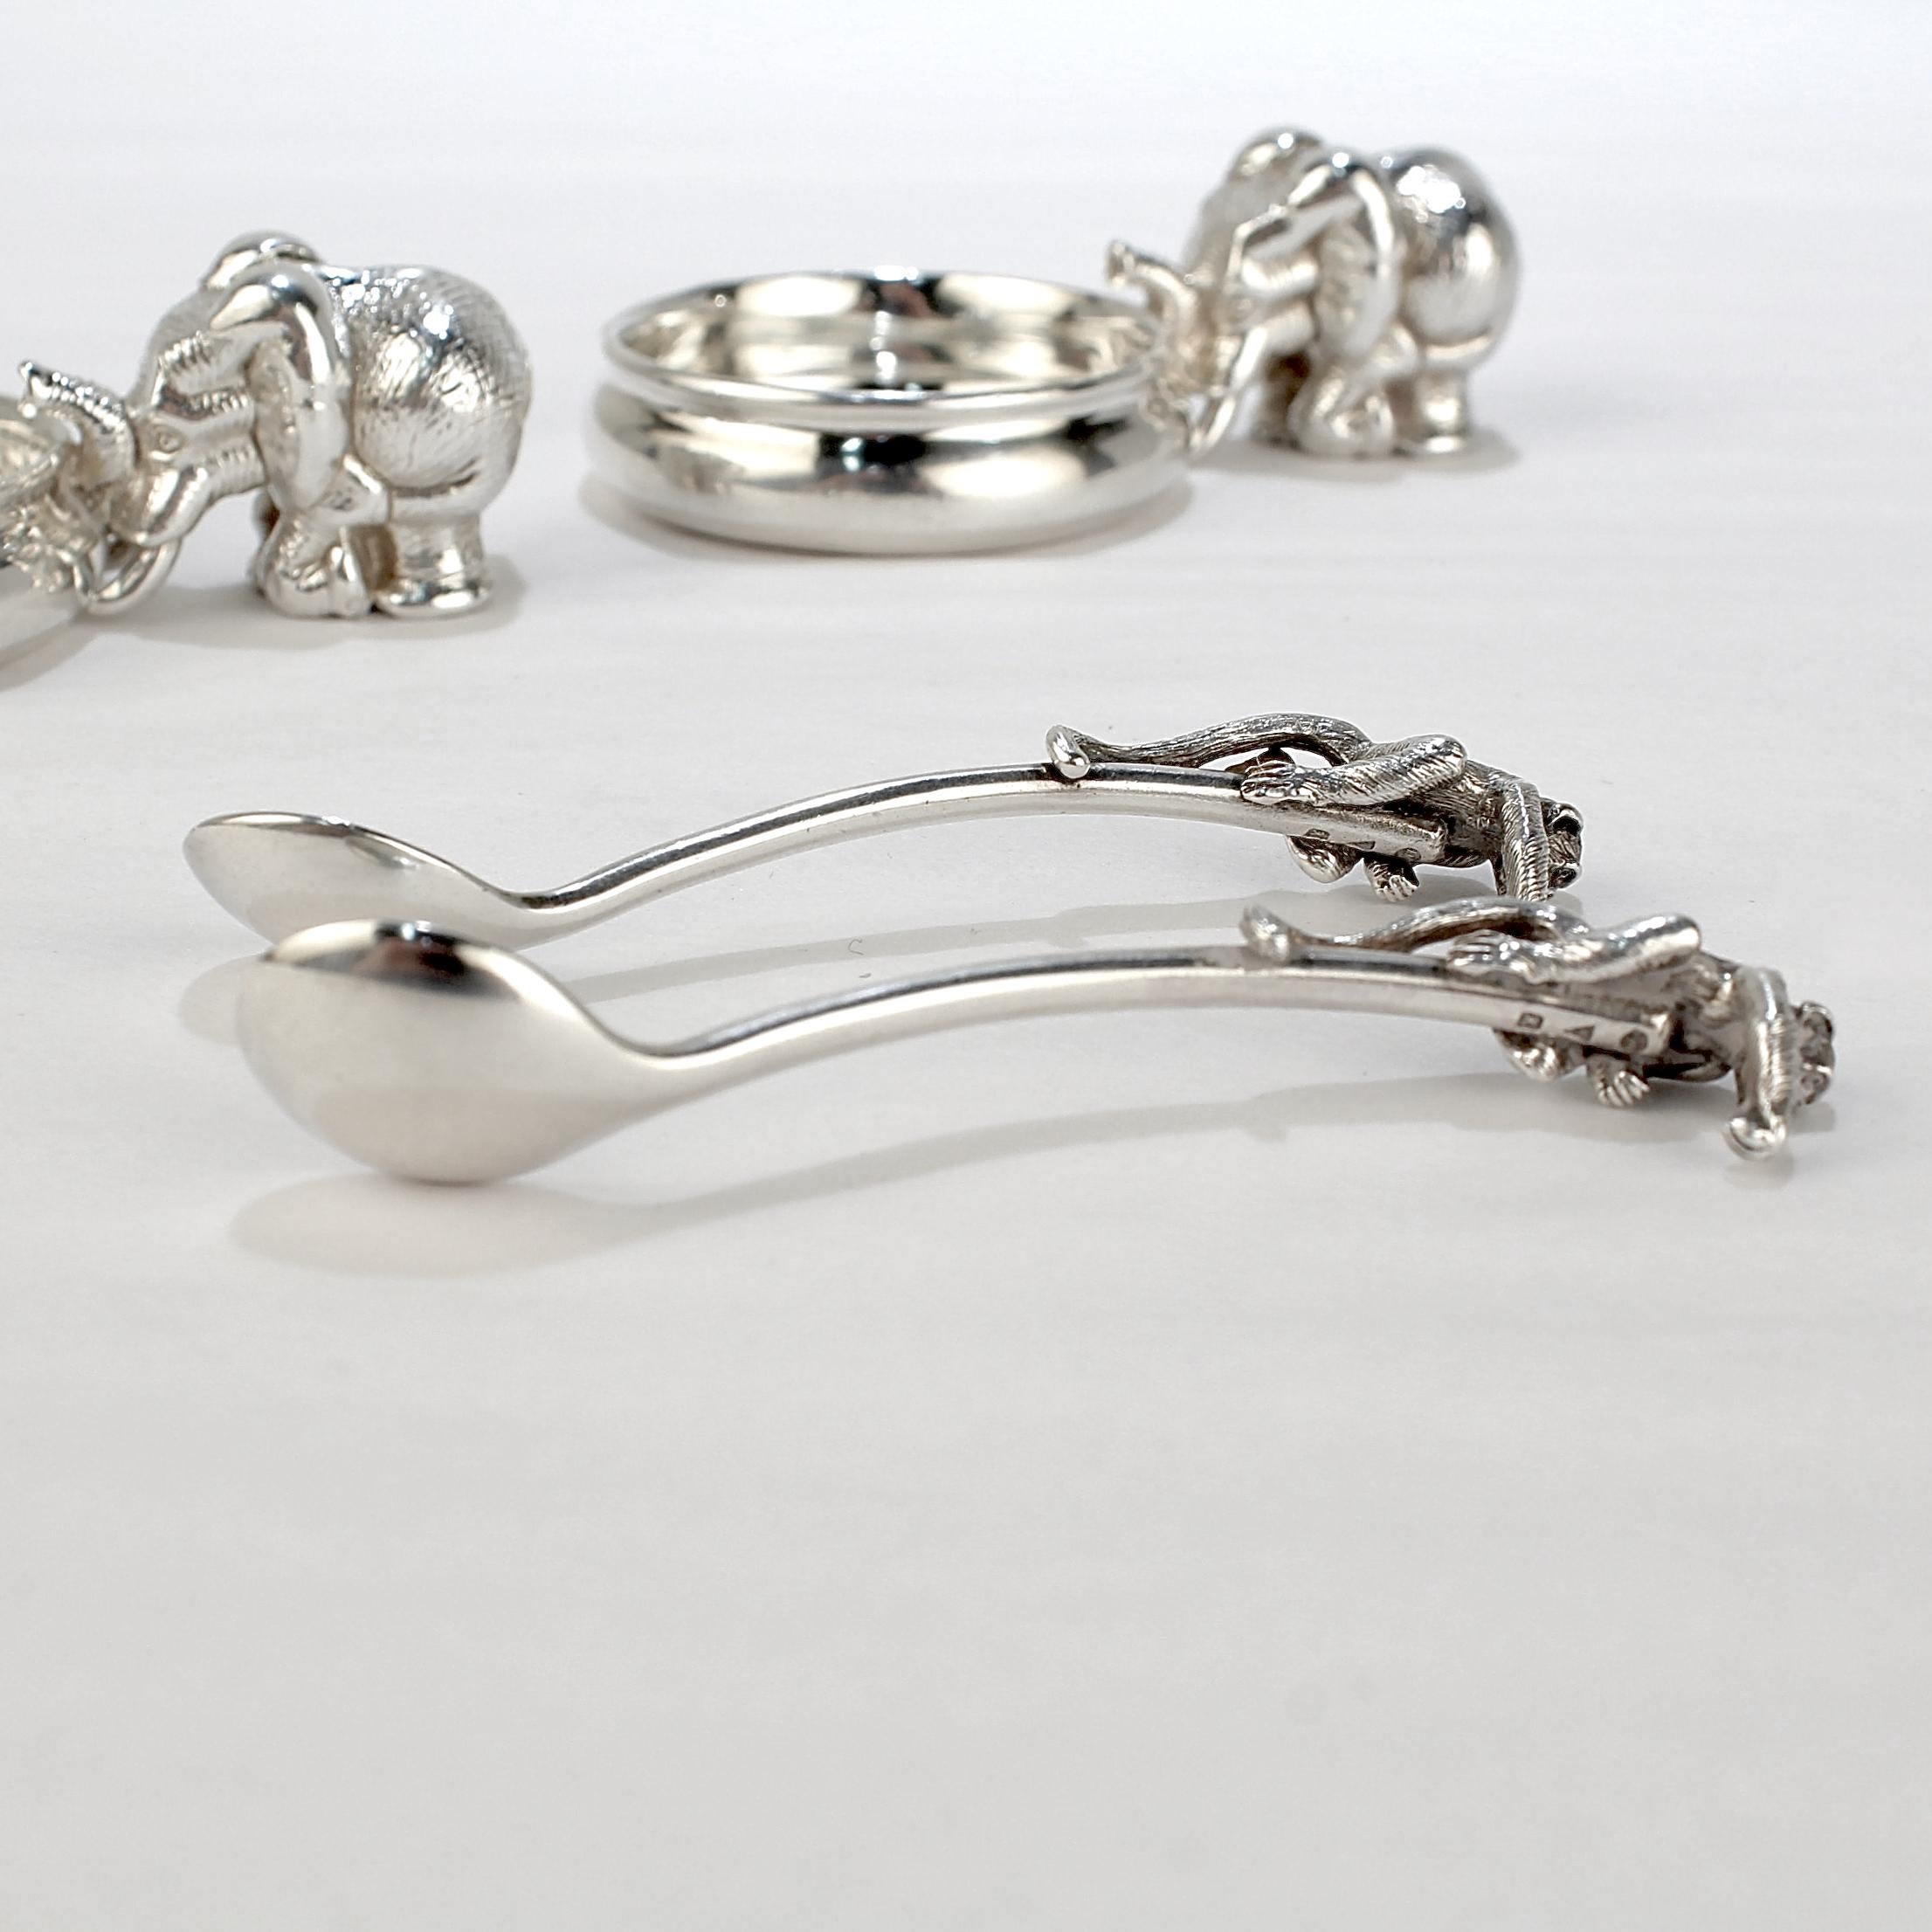 Pair of Patrick Mavros Elephant & Monkey Sterling Silver Mustard Pots & Spoons For Sale 5